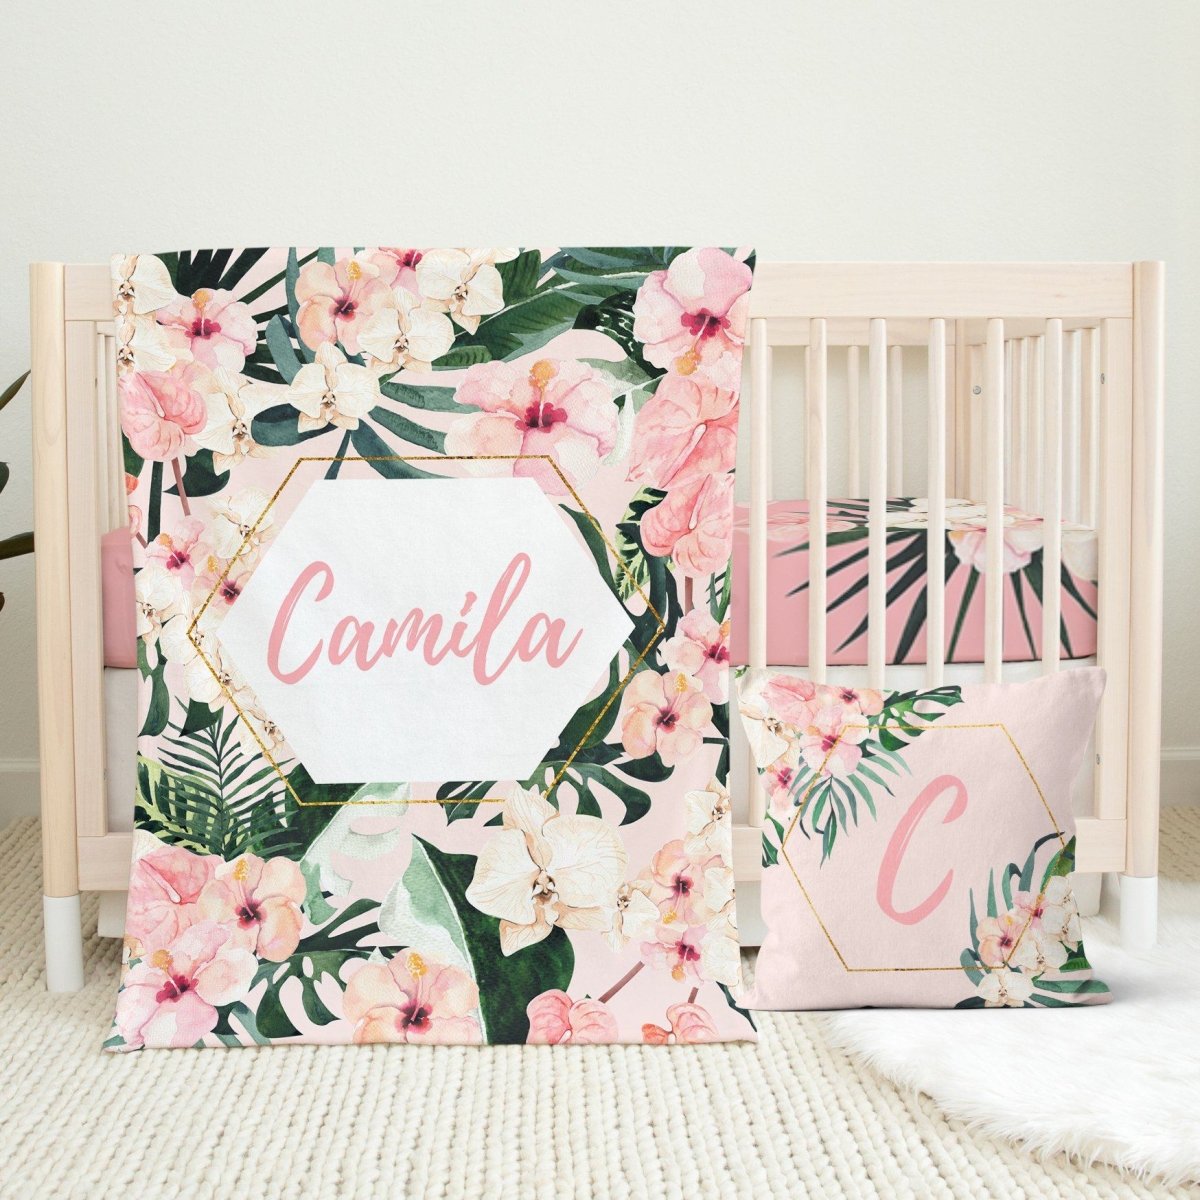 Tropical Floral Personalized Crib Sheet - gender_girl, Personalized_Yes, text